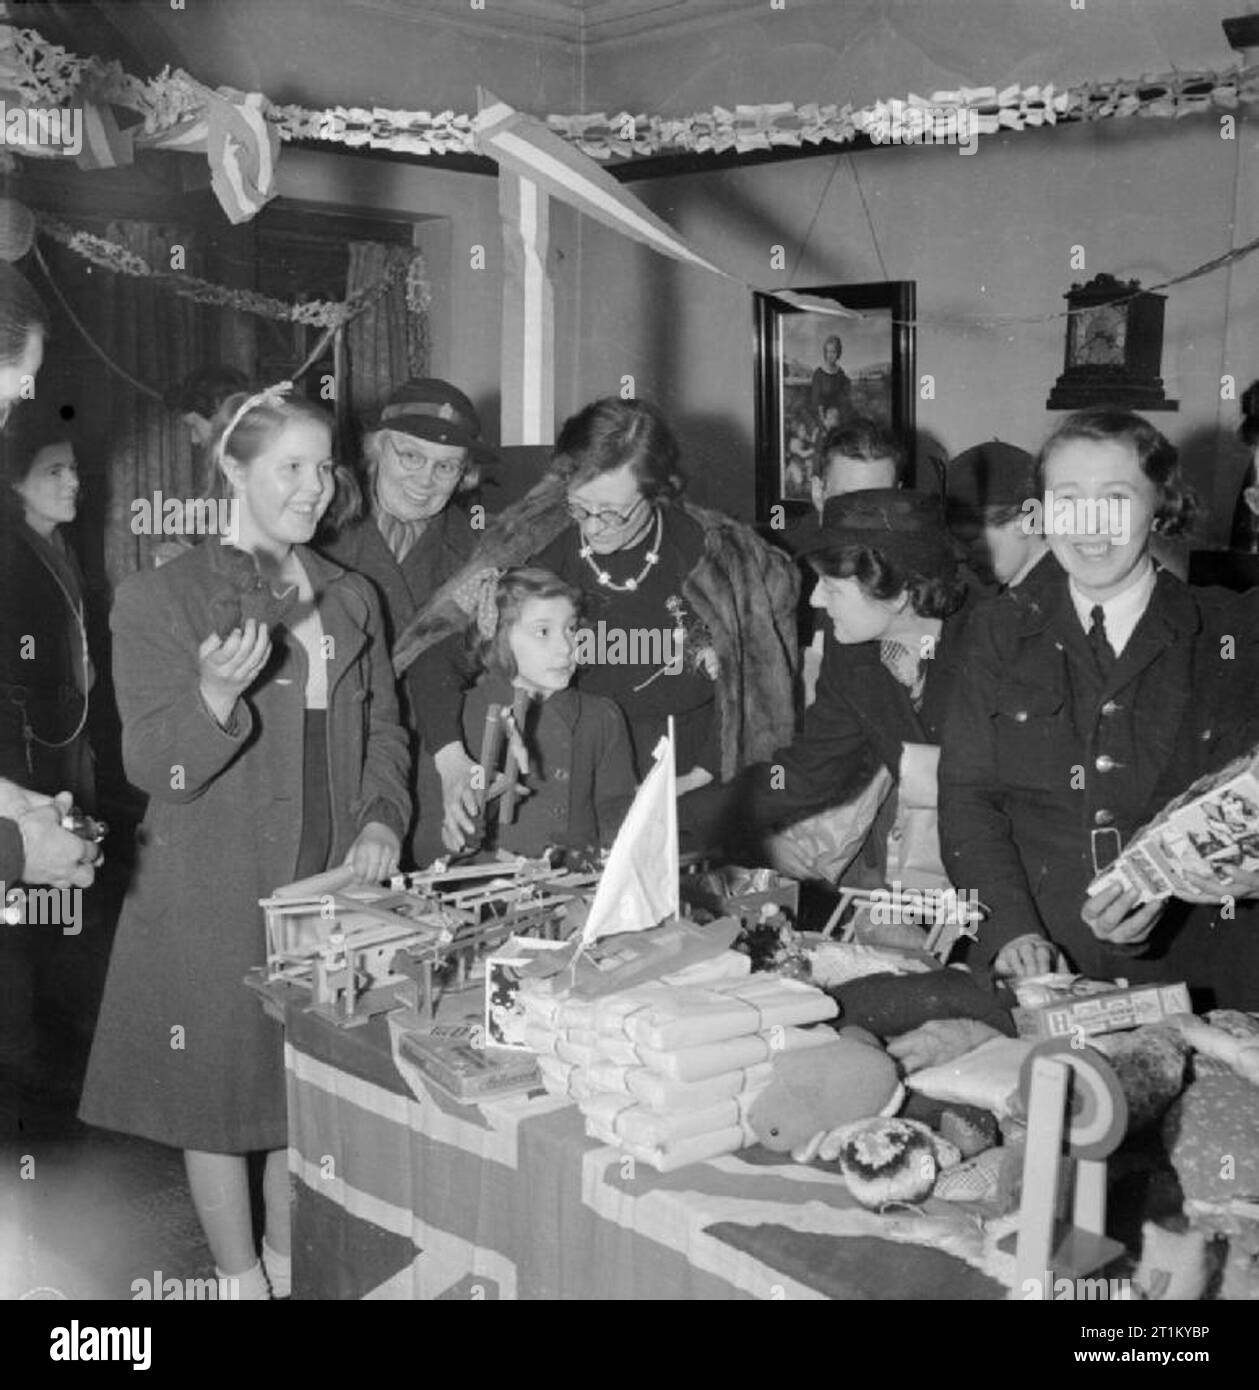 Bwrs Christmas Gifts Distributed To London's East Enders- American Aid To the Canning Town Settlement, London, England, UK, December 1944 Miss Constance Holland, the warden of Canning Town settlement, (centre) helps Norma Terry and Doreen Jones (left) to choose a gift from the pile of American toys on the table in front of them. The room is decorated with paper streamers and a member of the Women's Voluntary Service (WVS) can be seen between Doreen and Norma. The girls are both from Plaistow. Stock Photo